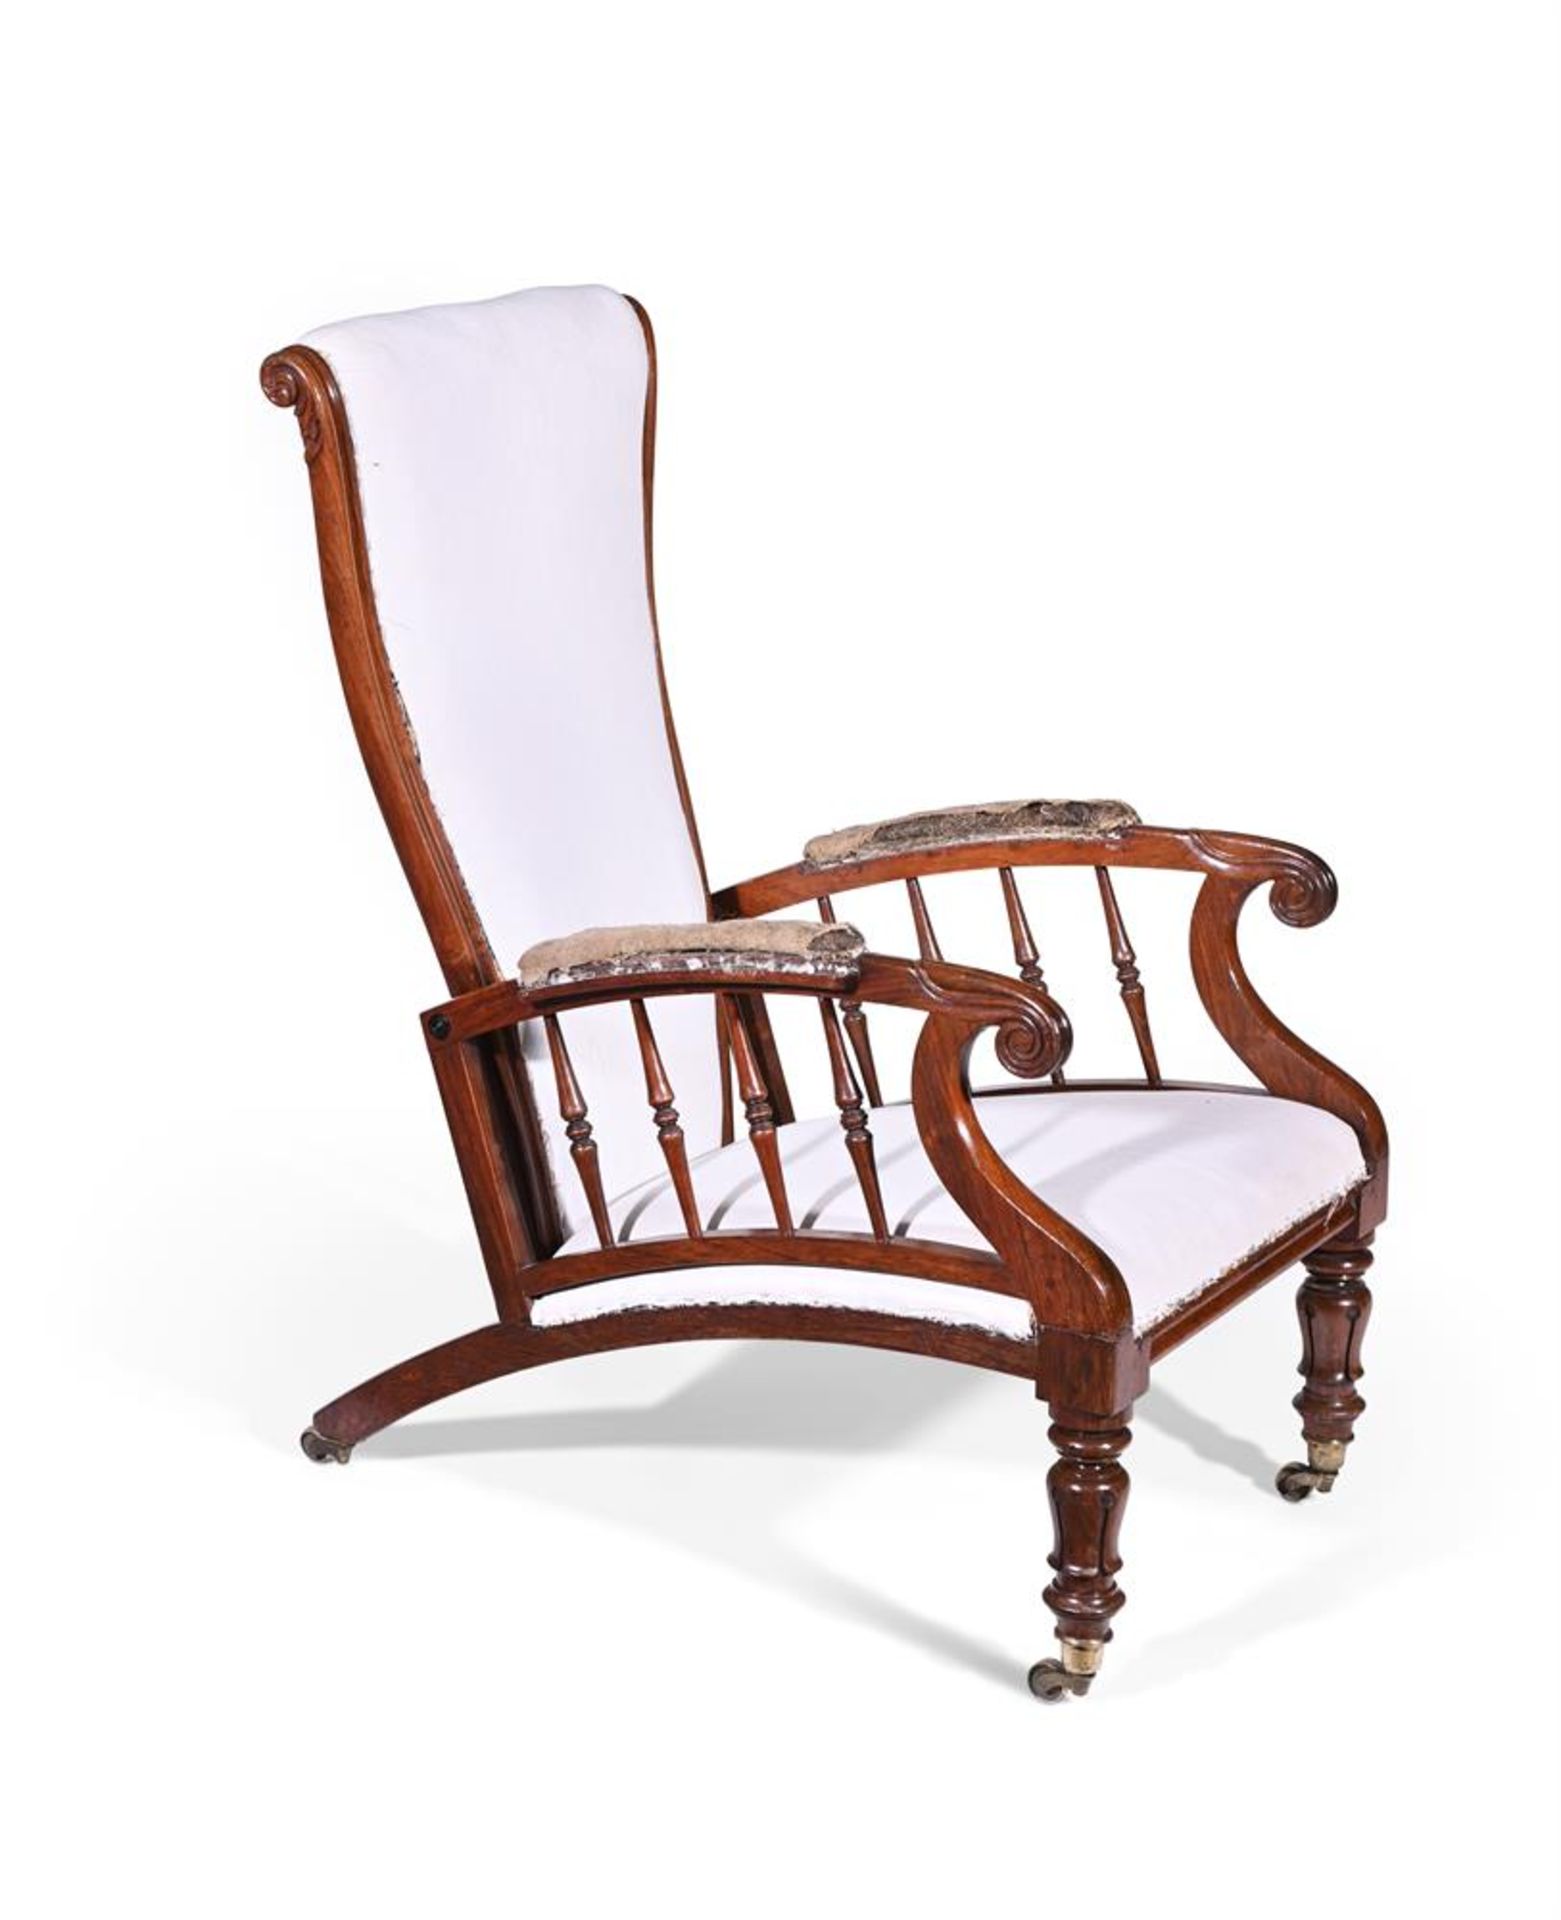 Y AN ARTS AND CRAFTS ROSEWOOD ARMCHAIR, IN THE MANNER OF PHILIP WEBB, CIRCA 1890 - Bild 2 aus 3